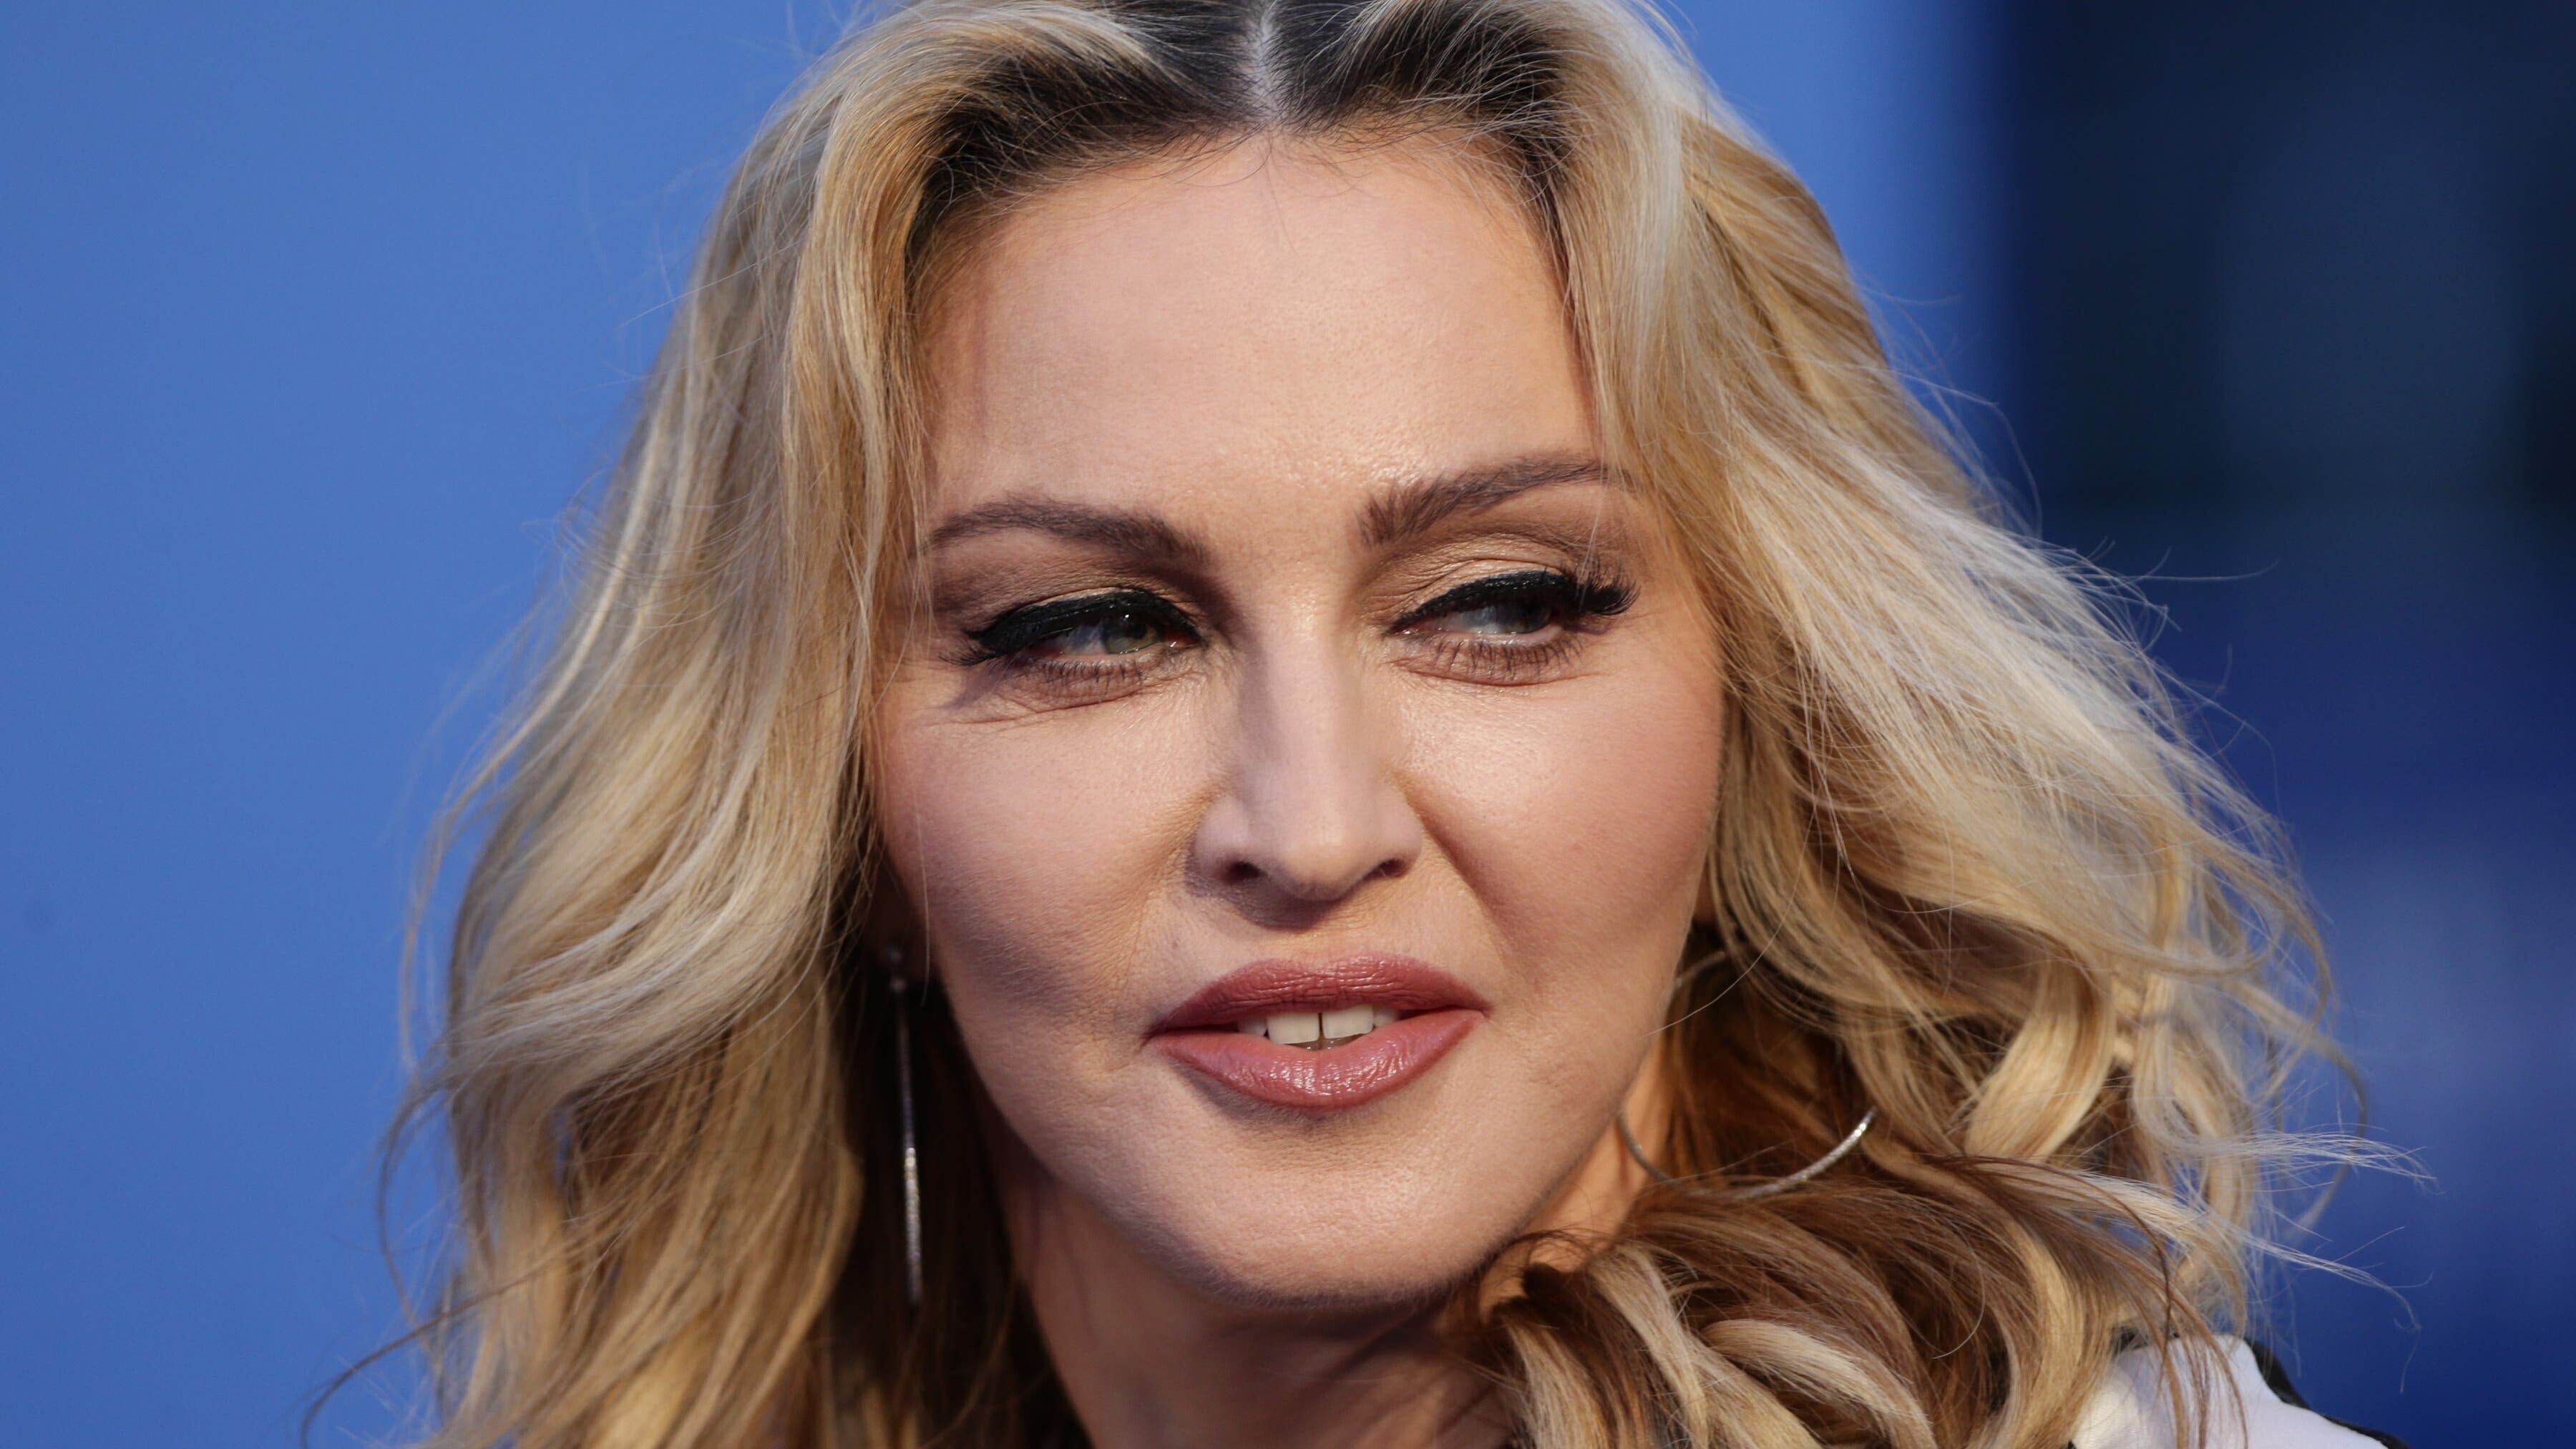 Madonna developed a ‘serious bacterial infection’ which led to a several-day stay in hospital (Yui Mok/PA)